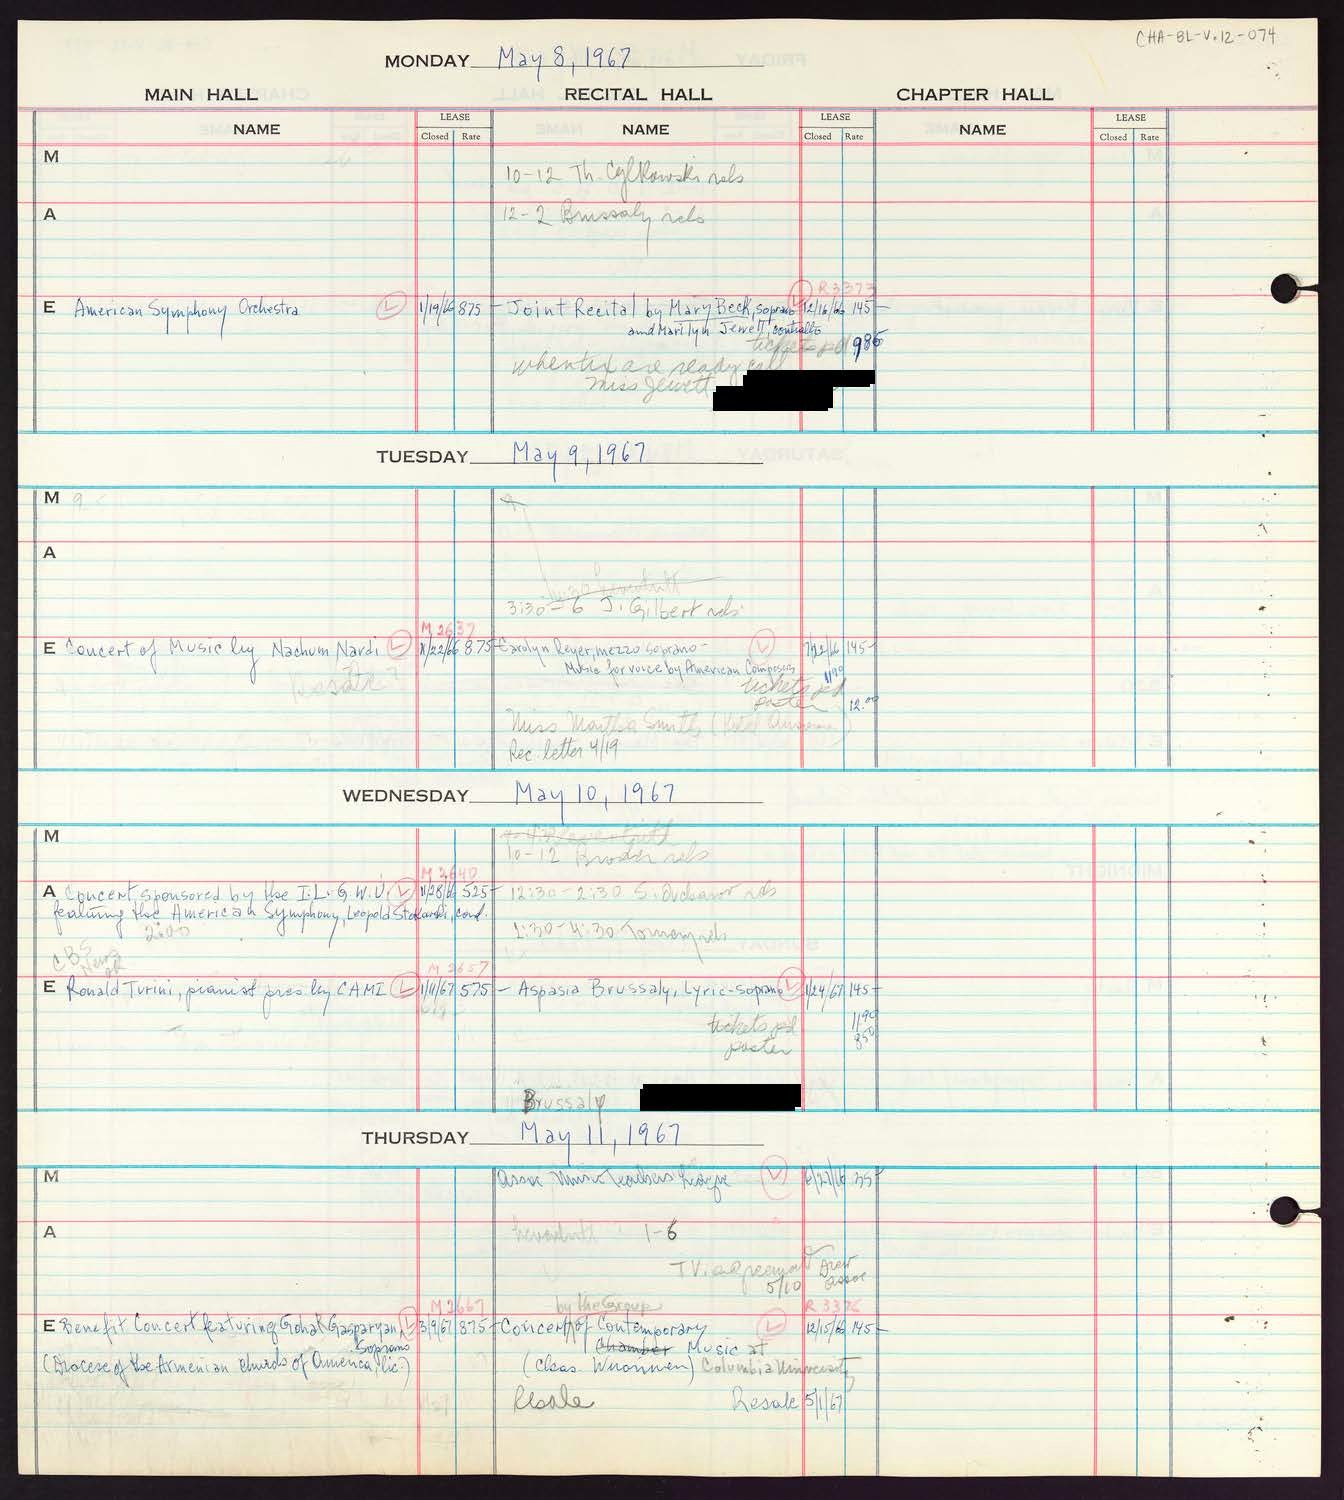 Carnegie Hall Booking Ledger, volume 12, page 74